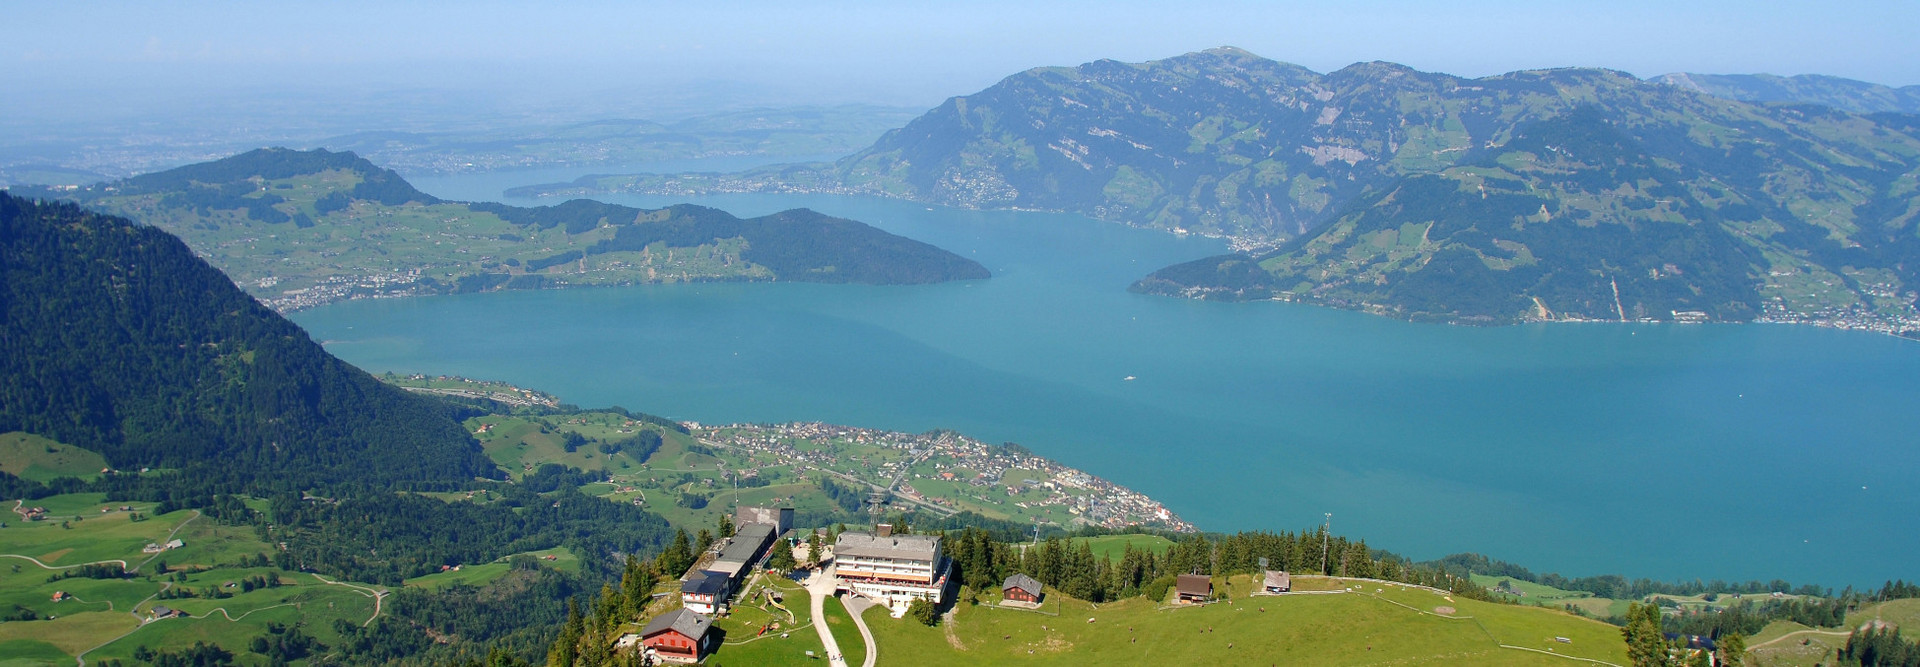 View of Klewenalp with Lake Lucerne in the background.